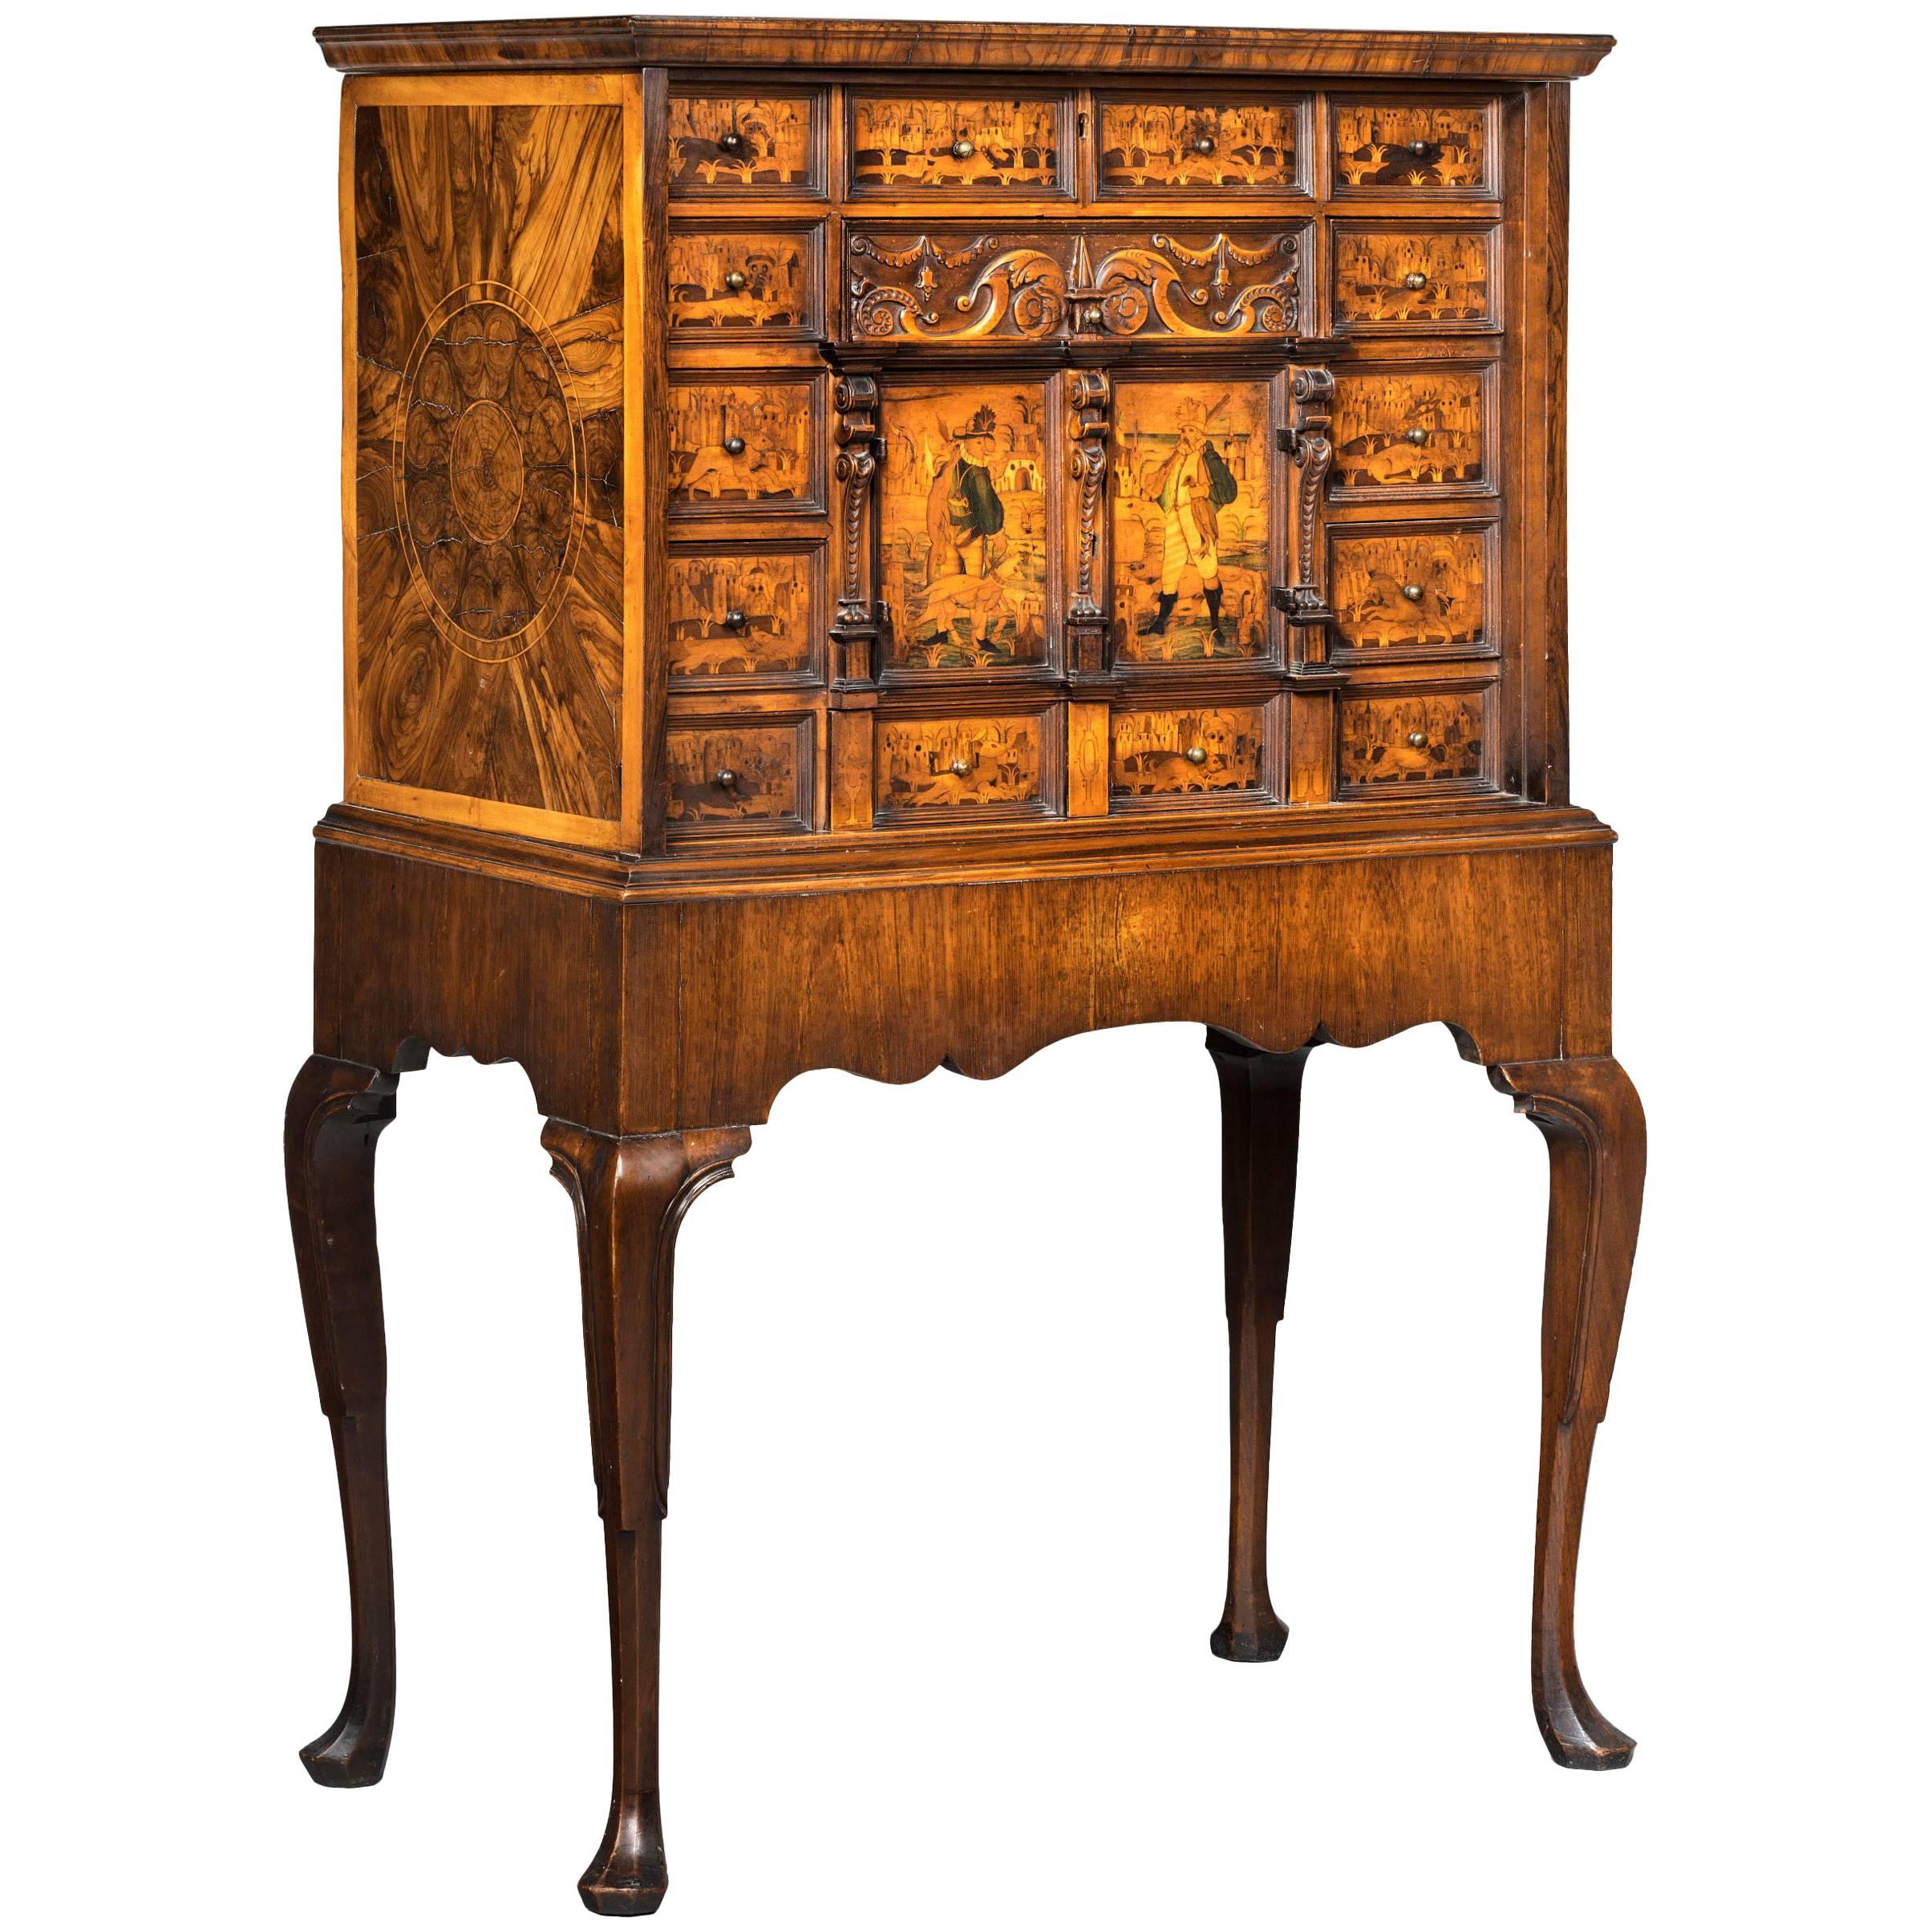 Early 18th Century Continental Walnut Cabinet on Stand